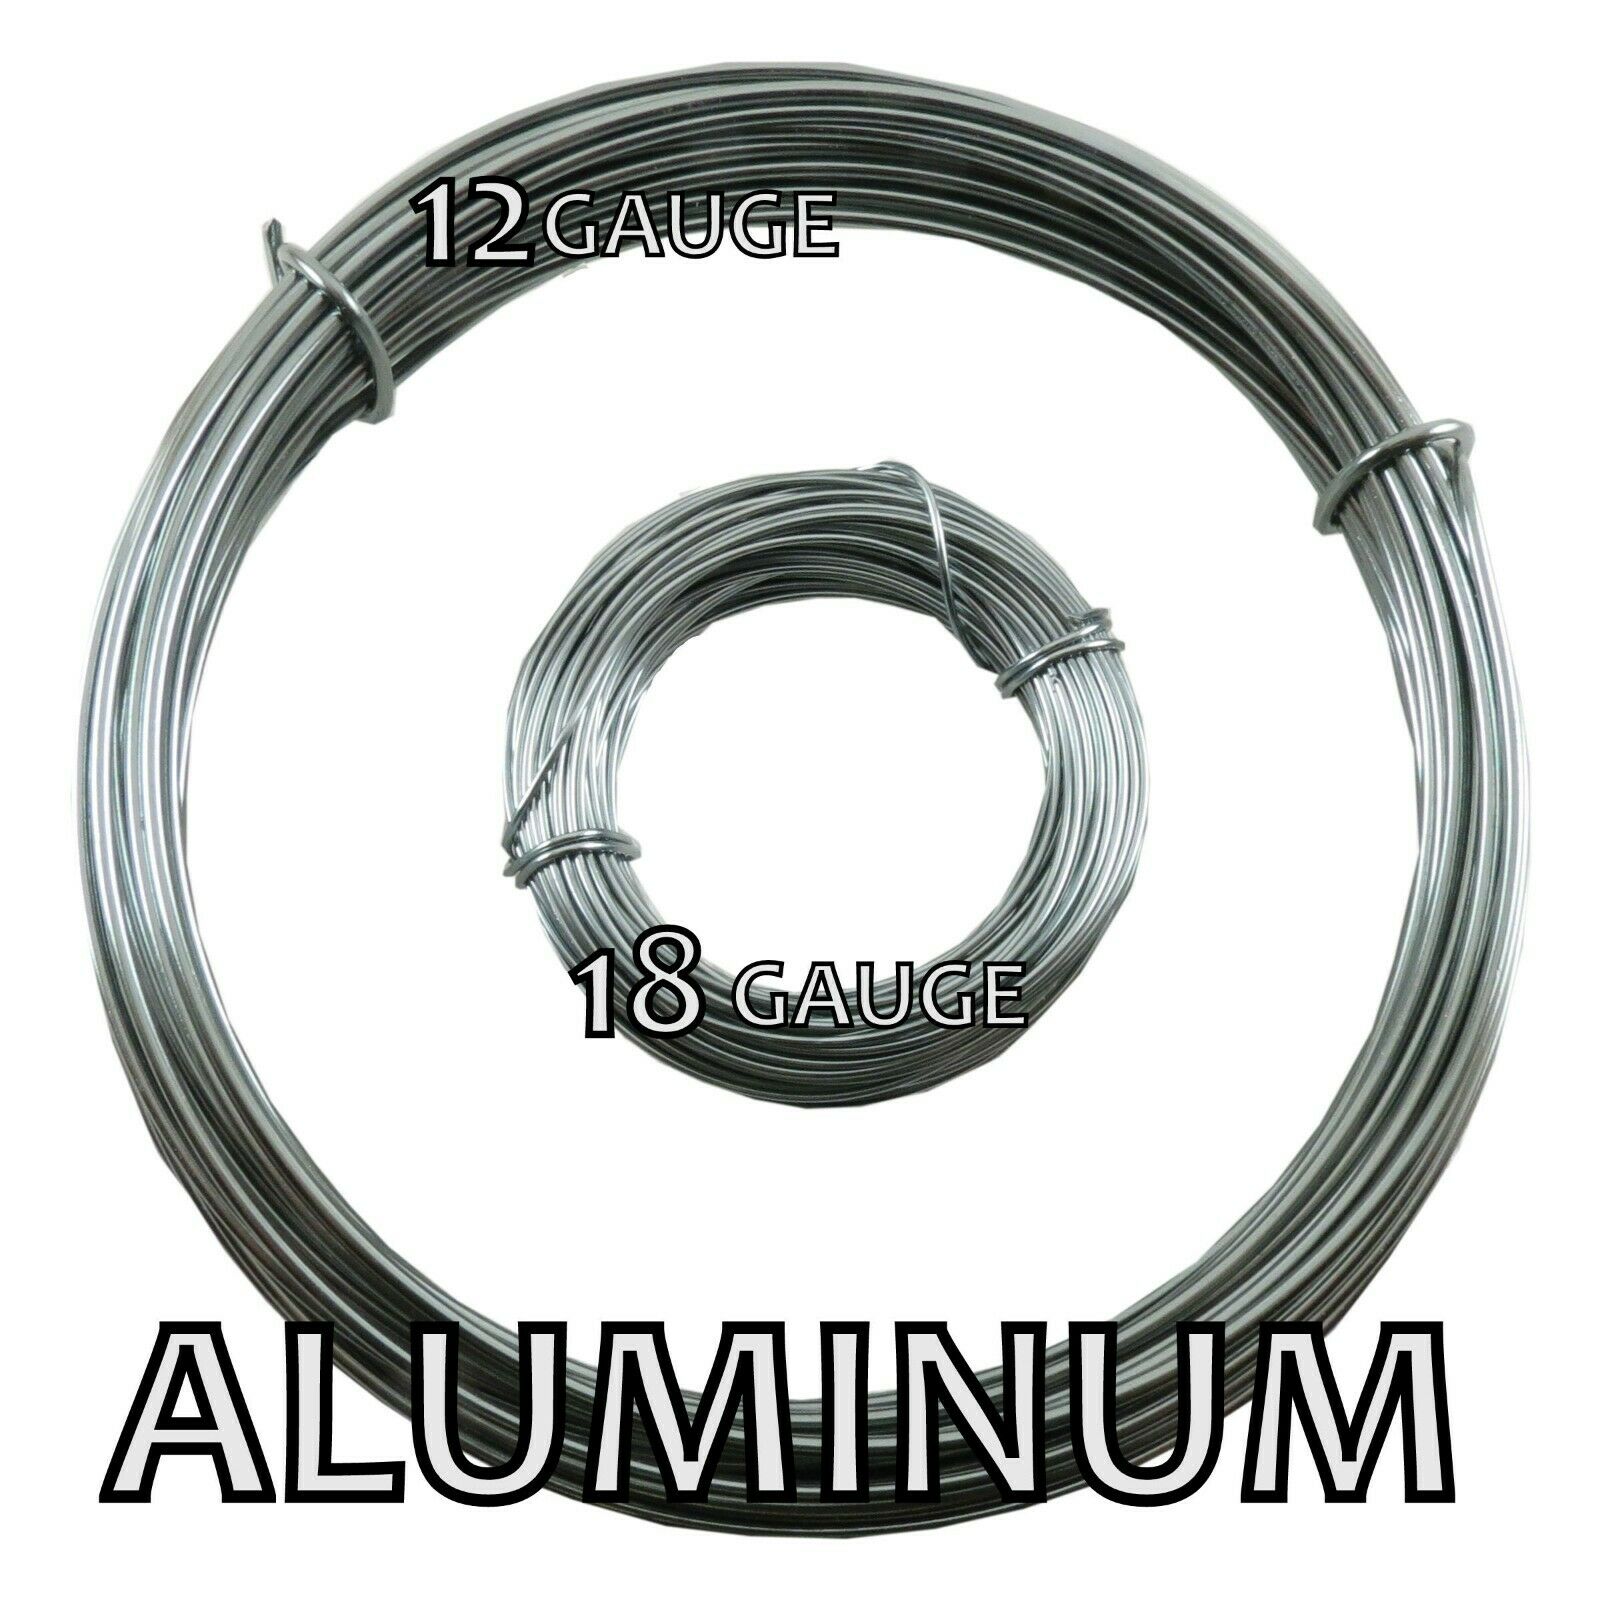 Aluminum Round Bead Smith Wire 12 and 18 gauge 39 ft